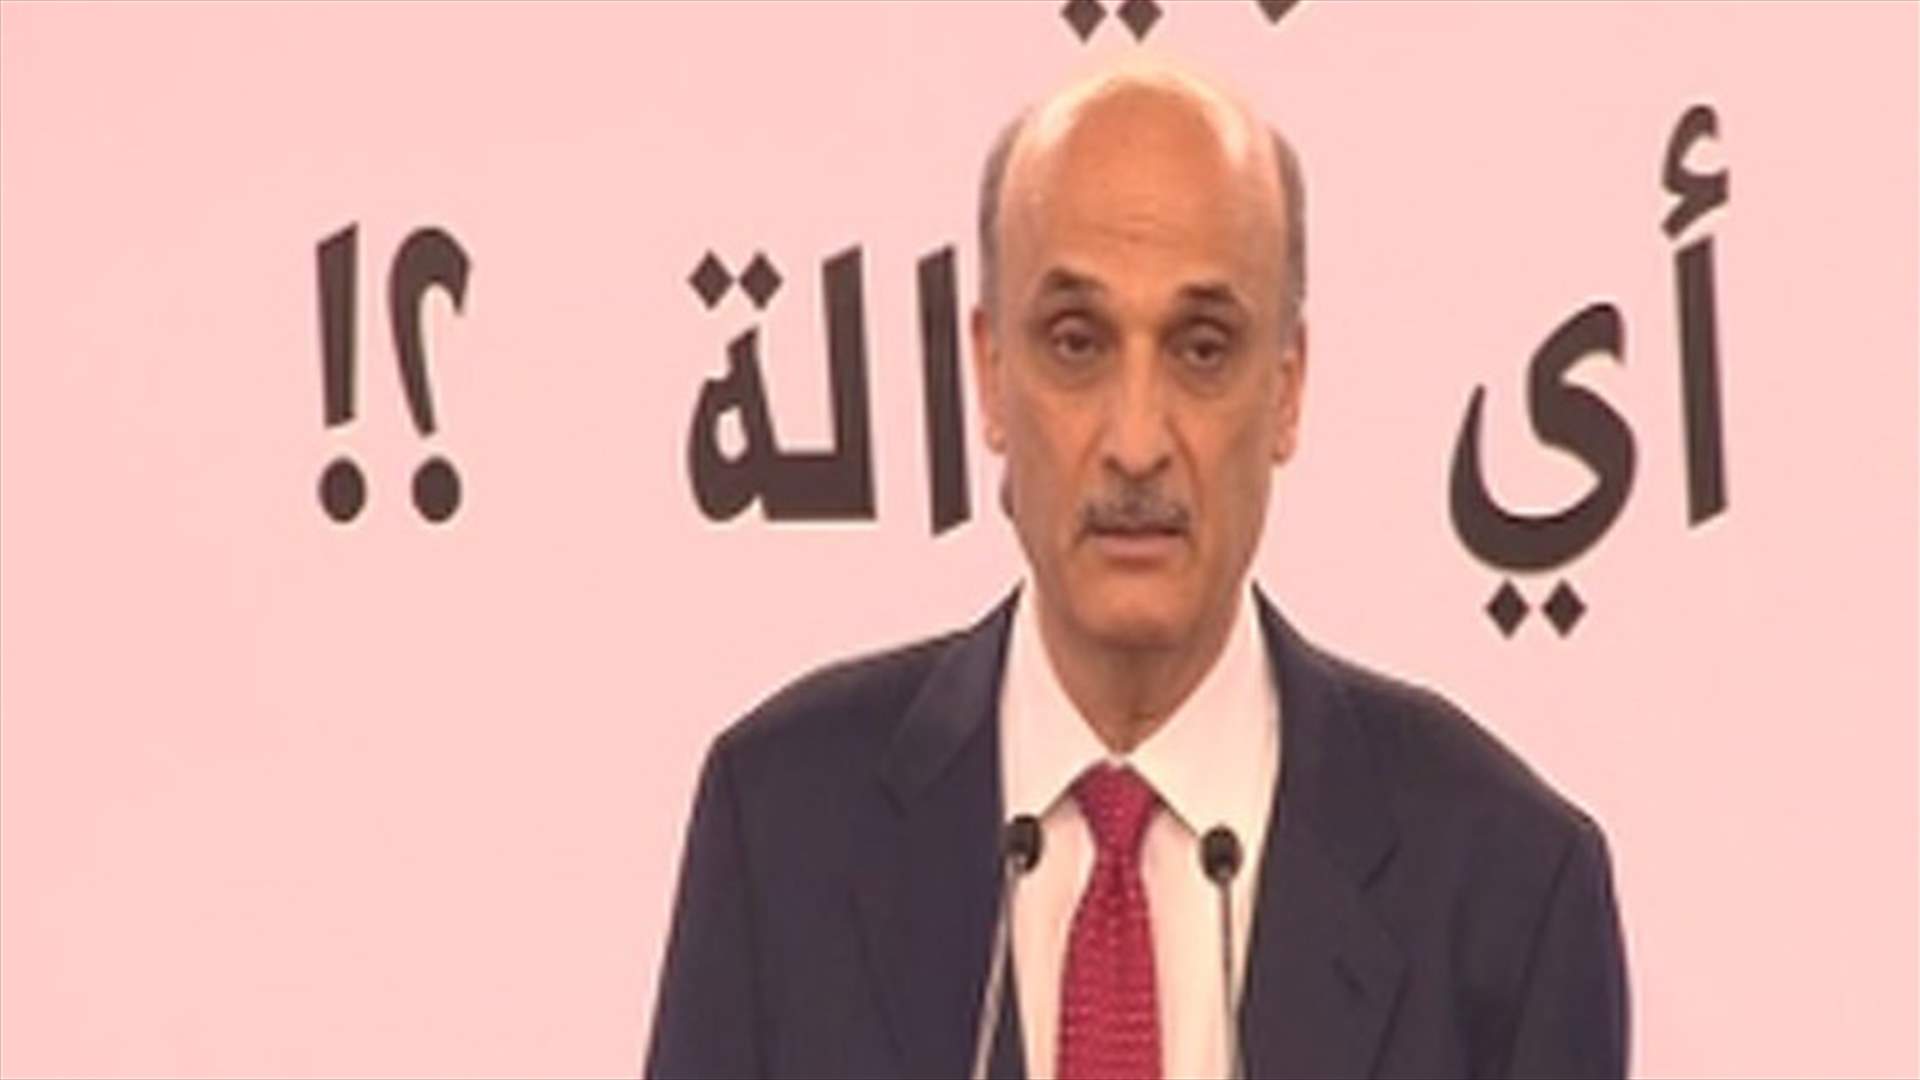 Military Court poses a threat to public safety - Geagea 